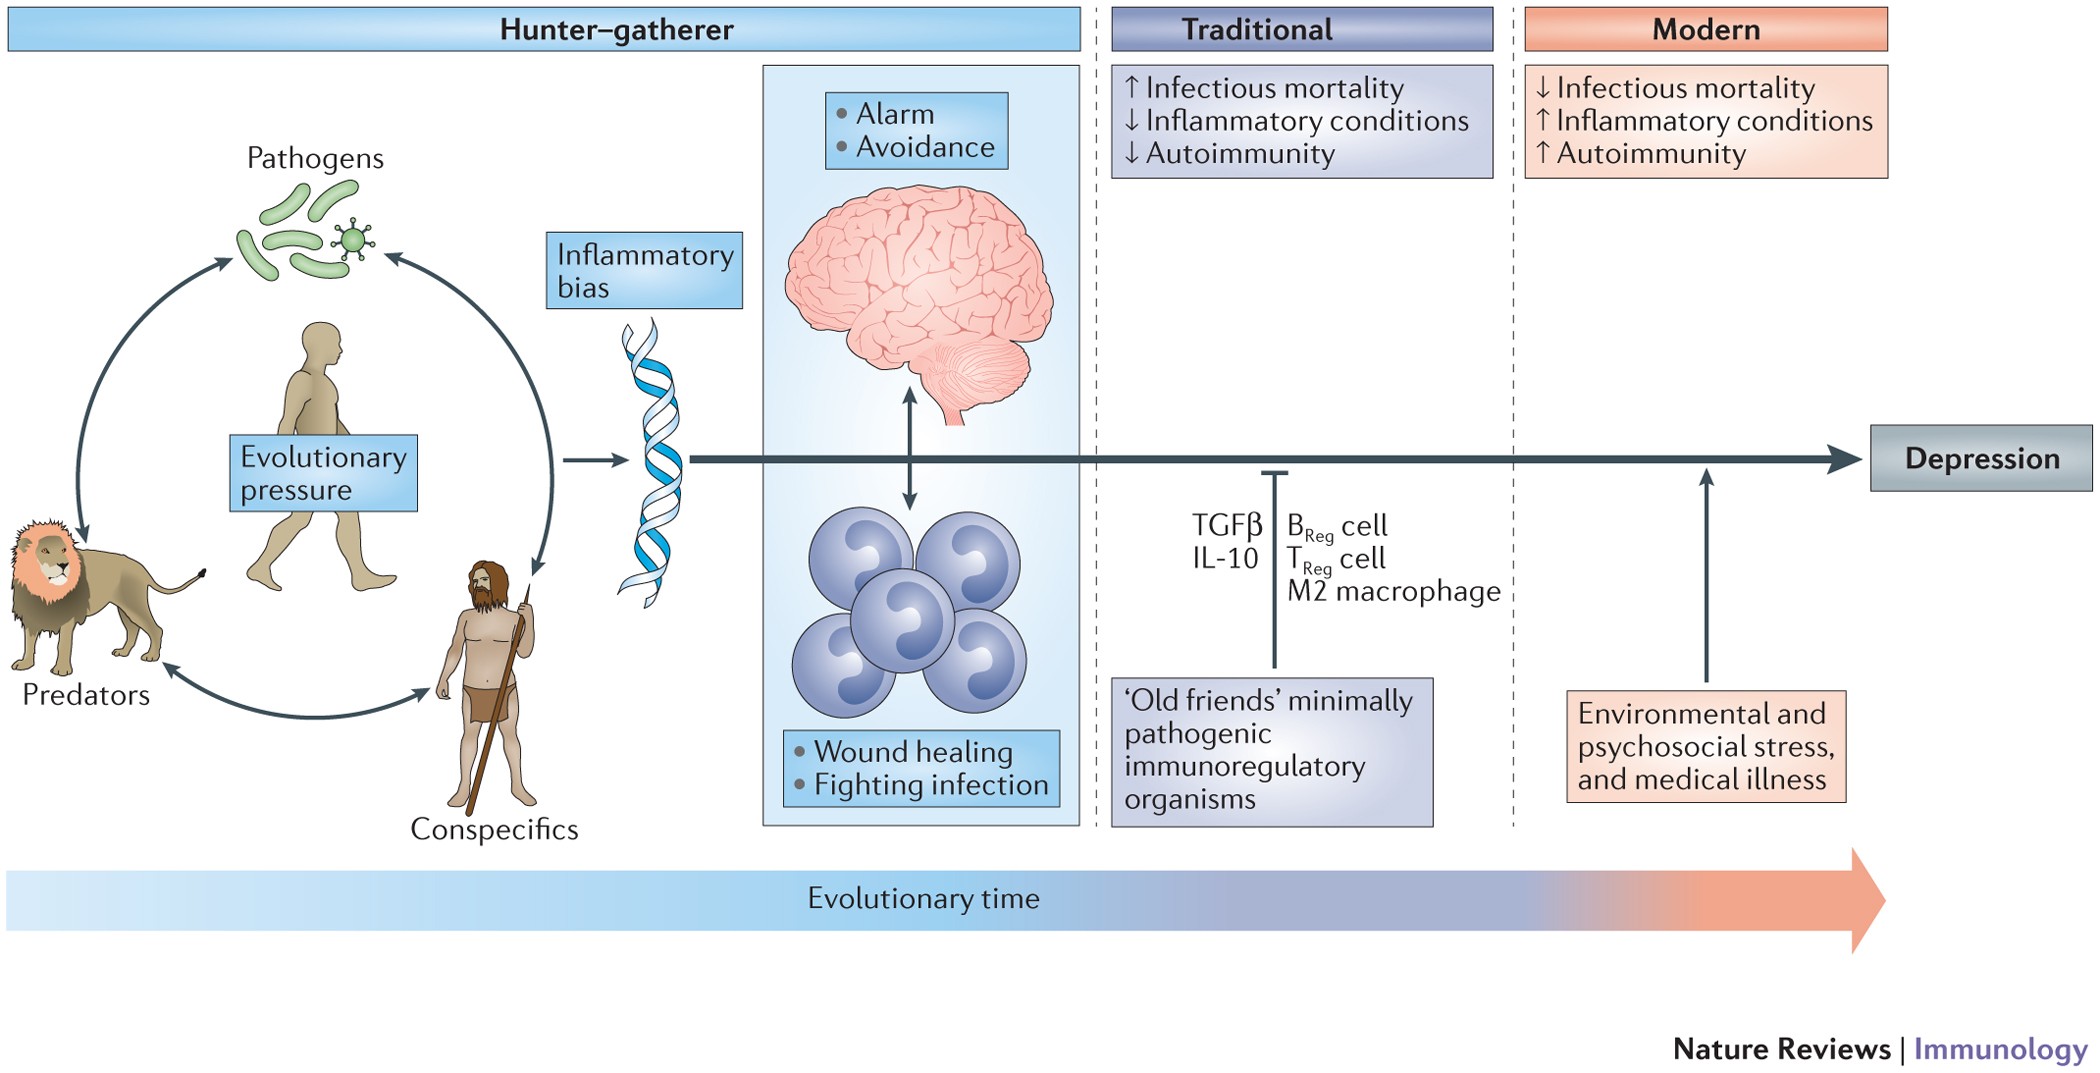 Nature Reviews Immunology - In this Review